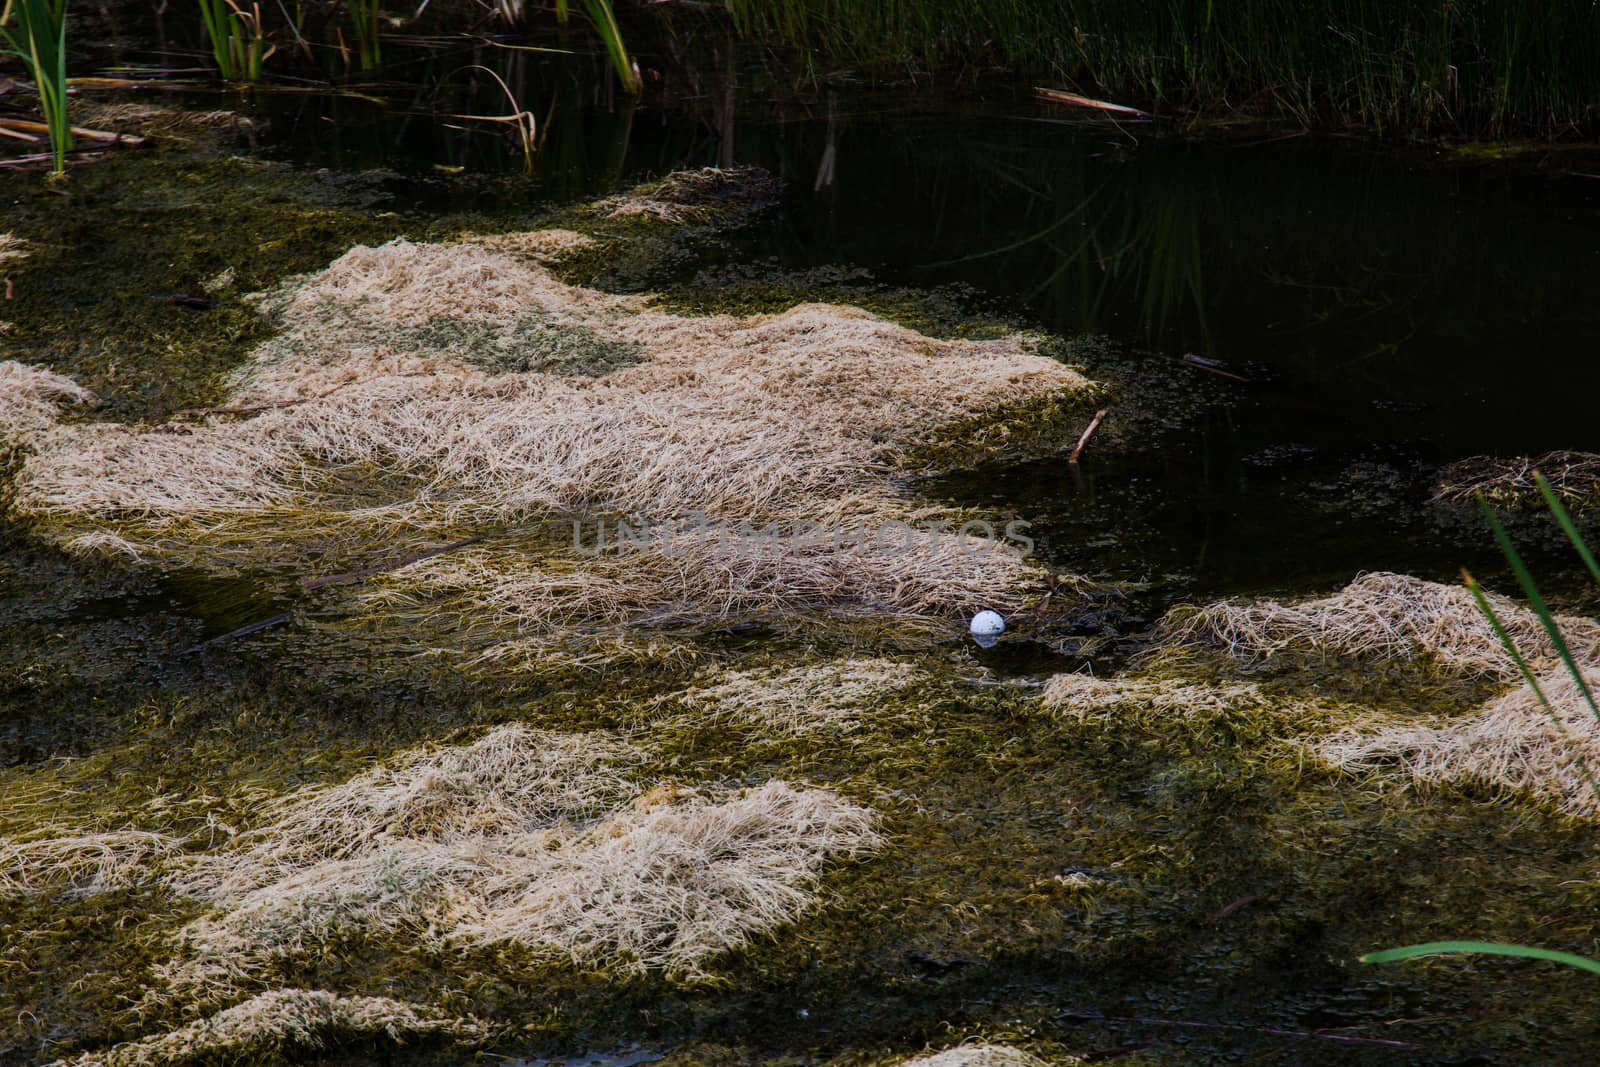 A golf ball is stuck in the muck of a particularly swampy water hazard.